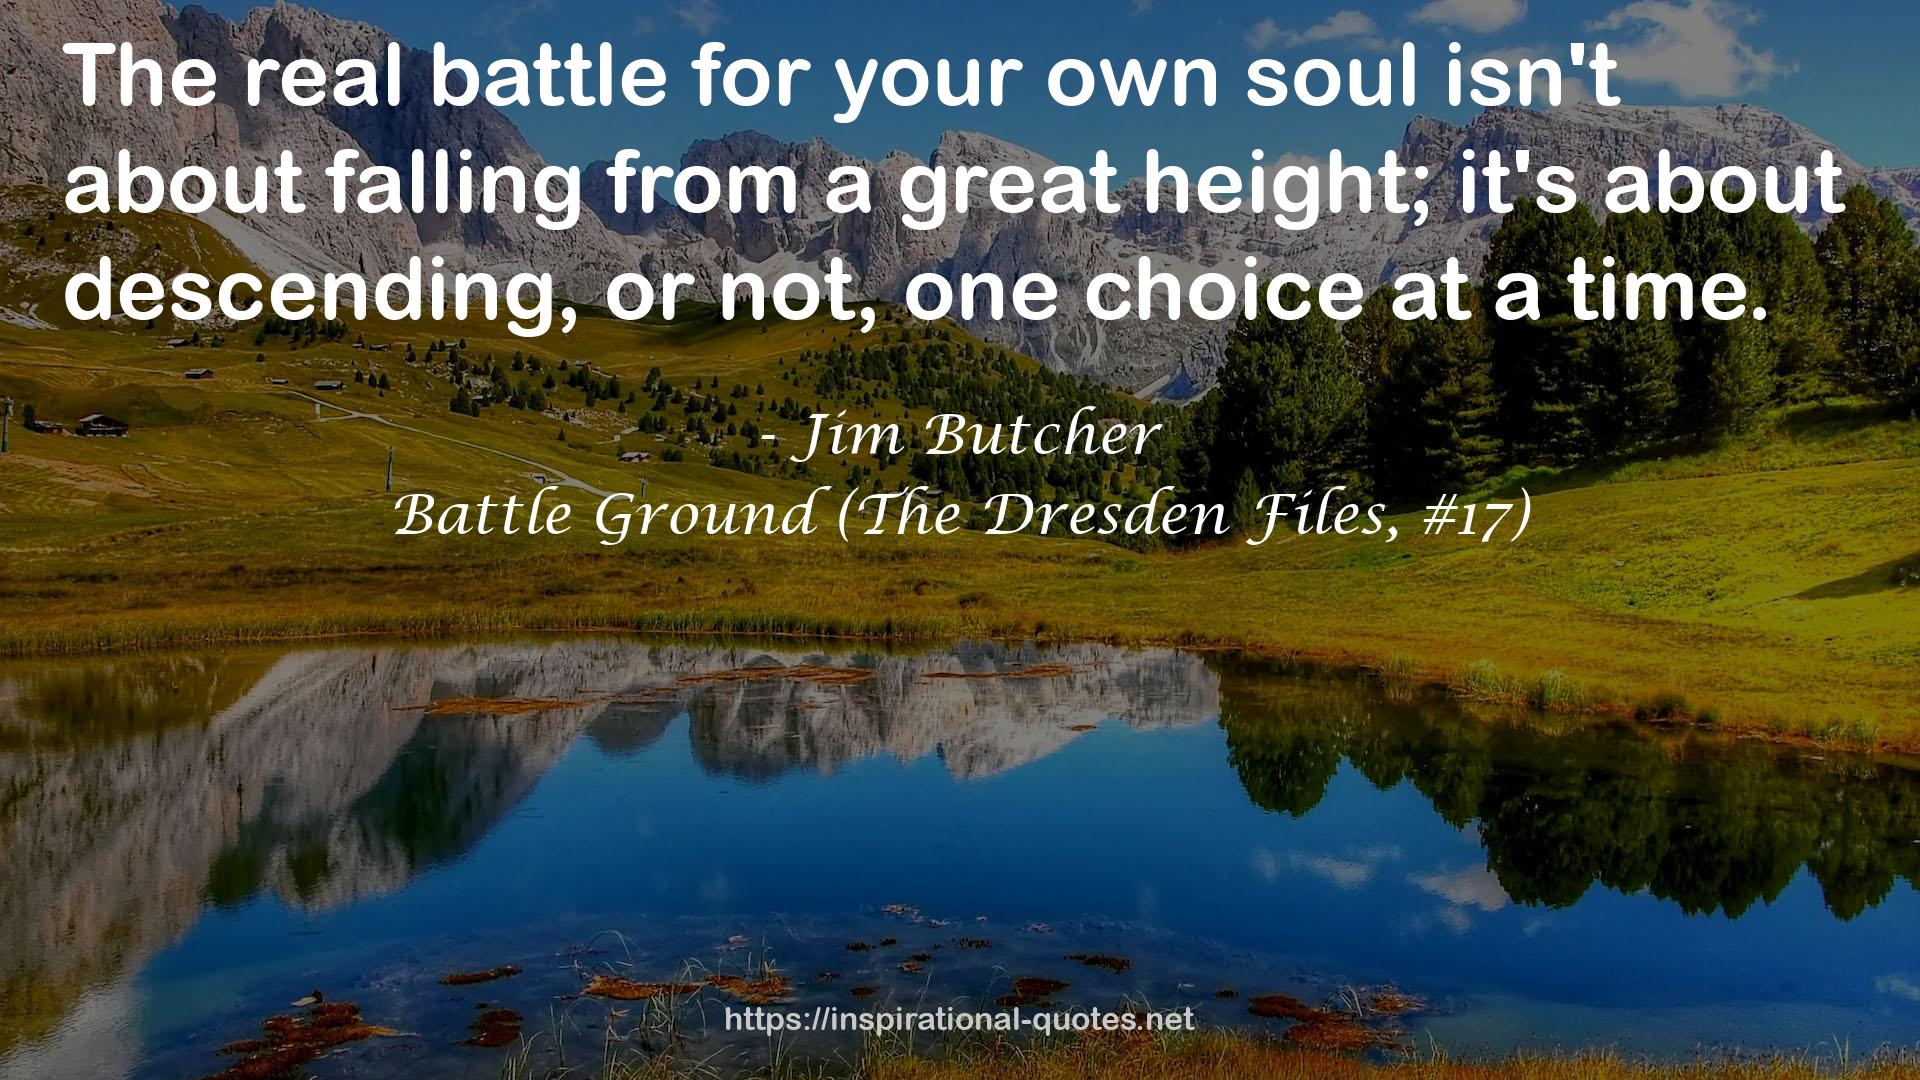 Battle Ground (The Dresden Files, #17) QUOTES